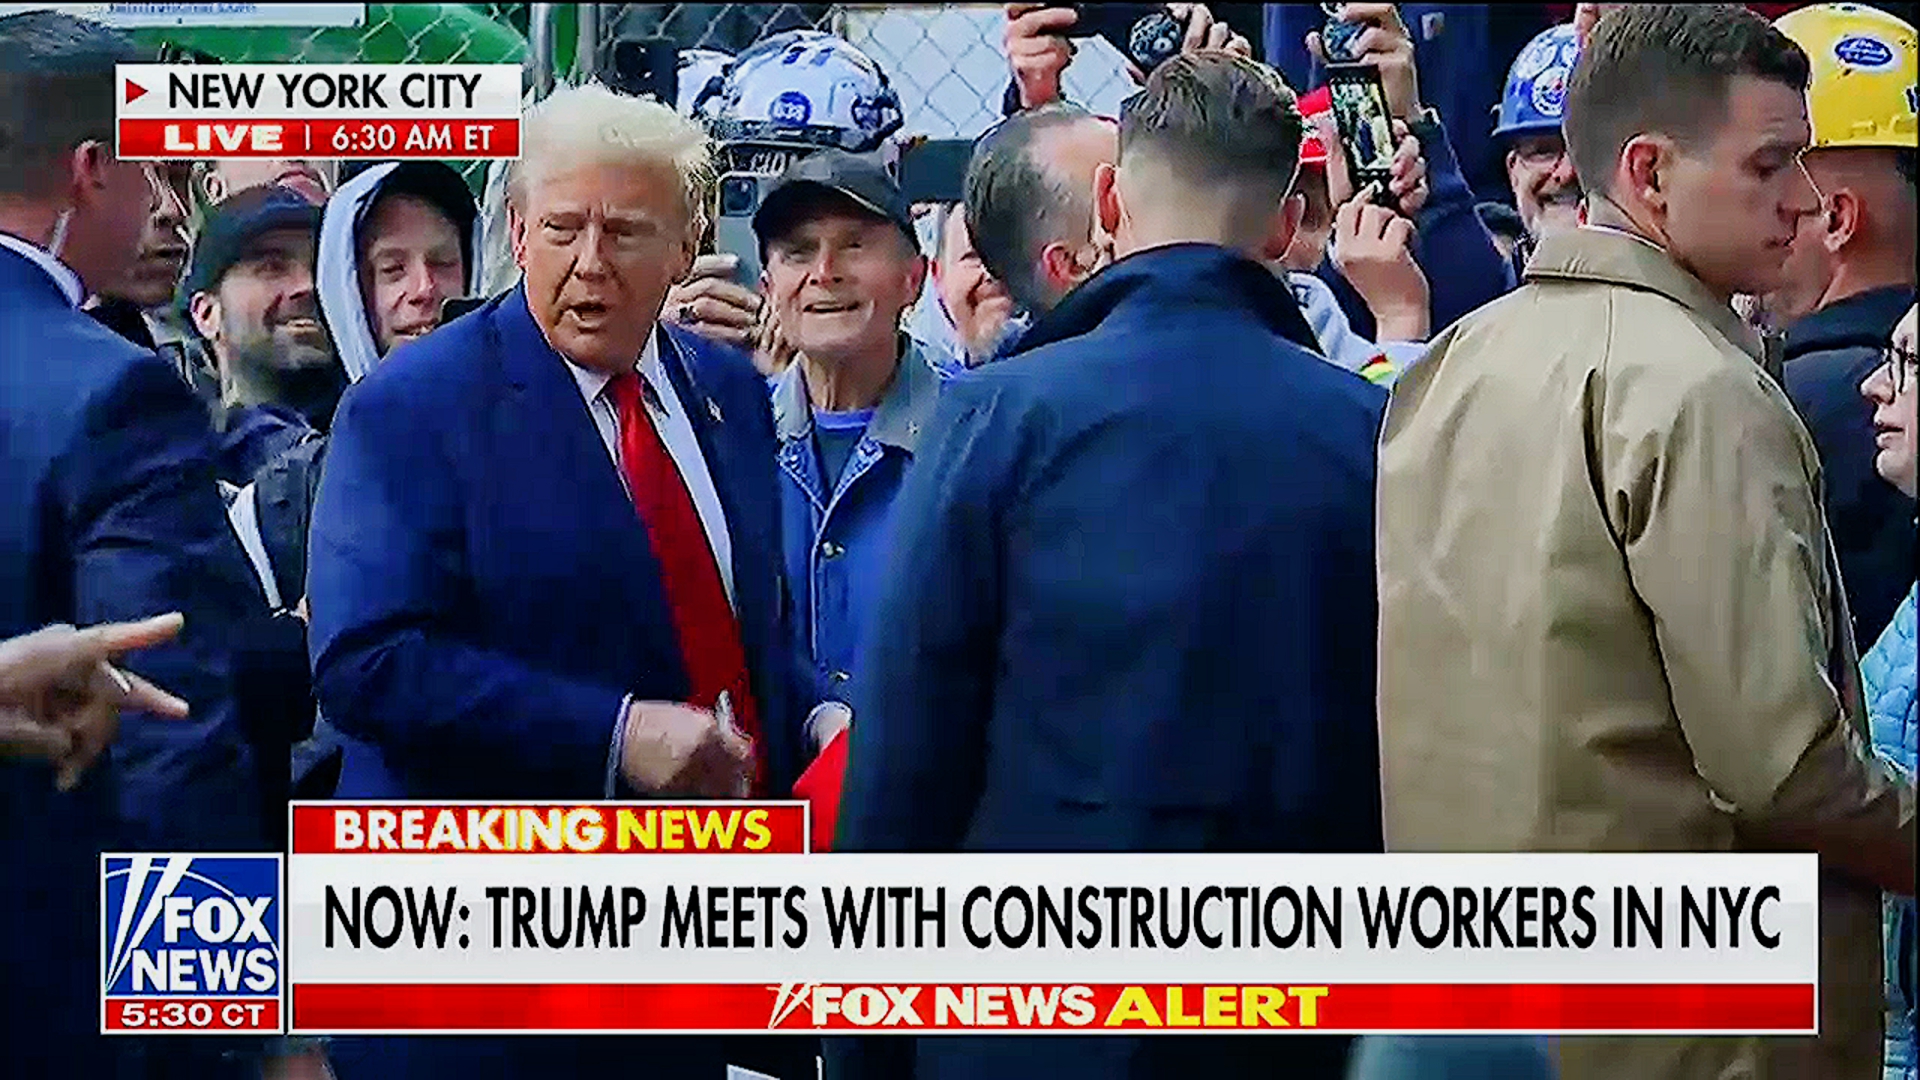 Fox News Spends 20 Minutes On Trump NY Photo Op With Fans [Video]